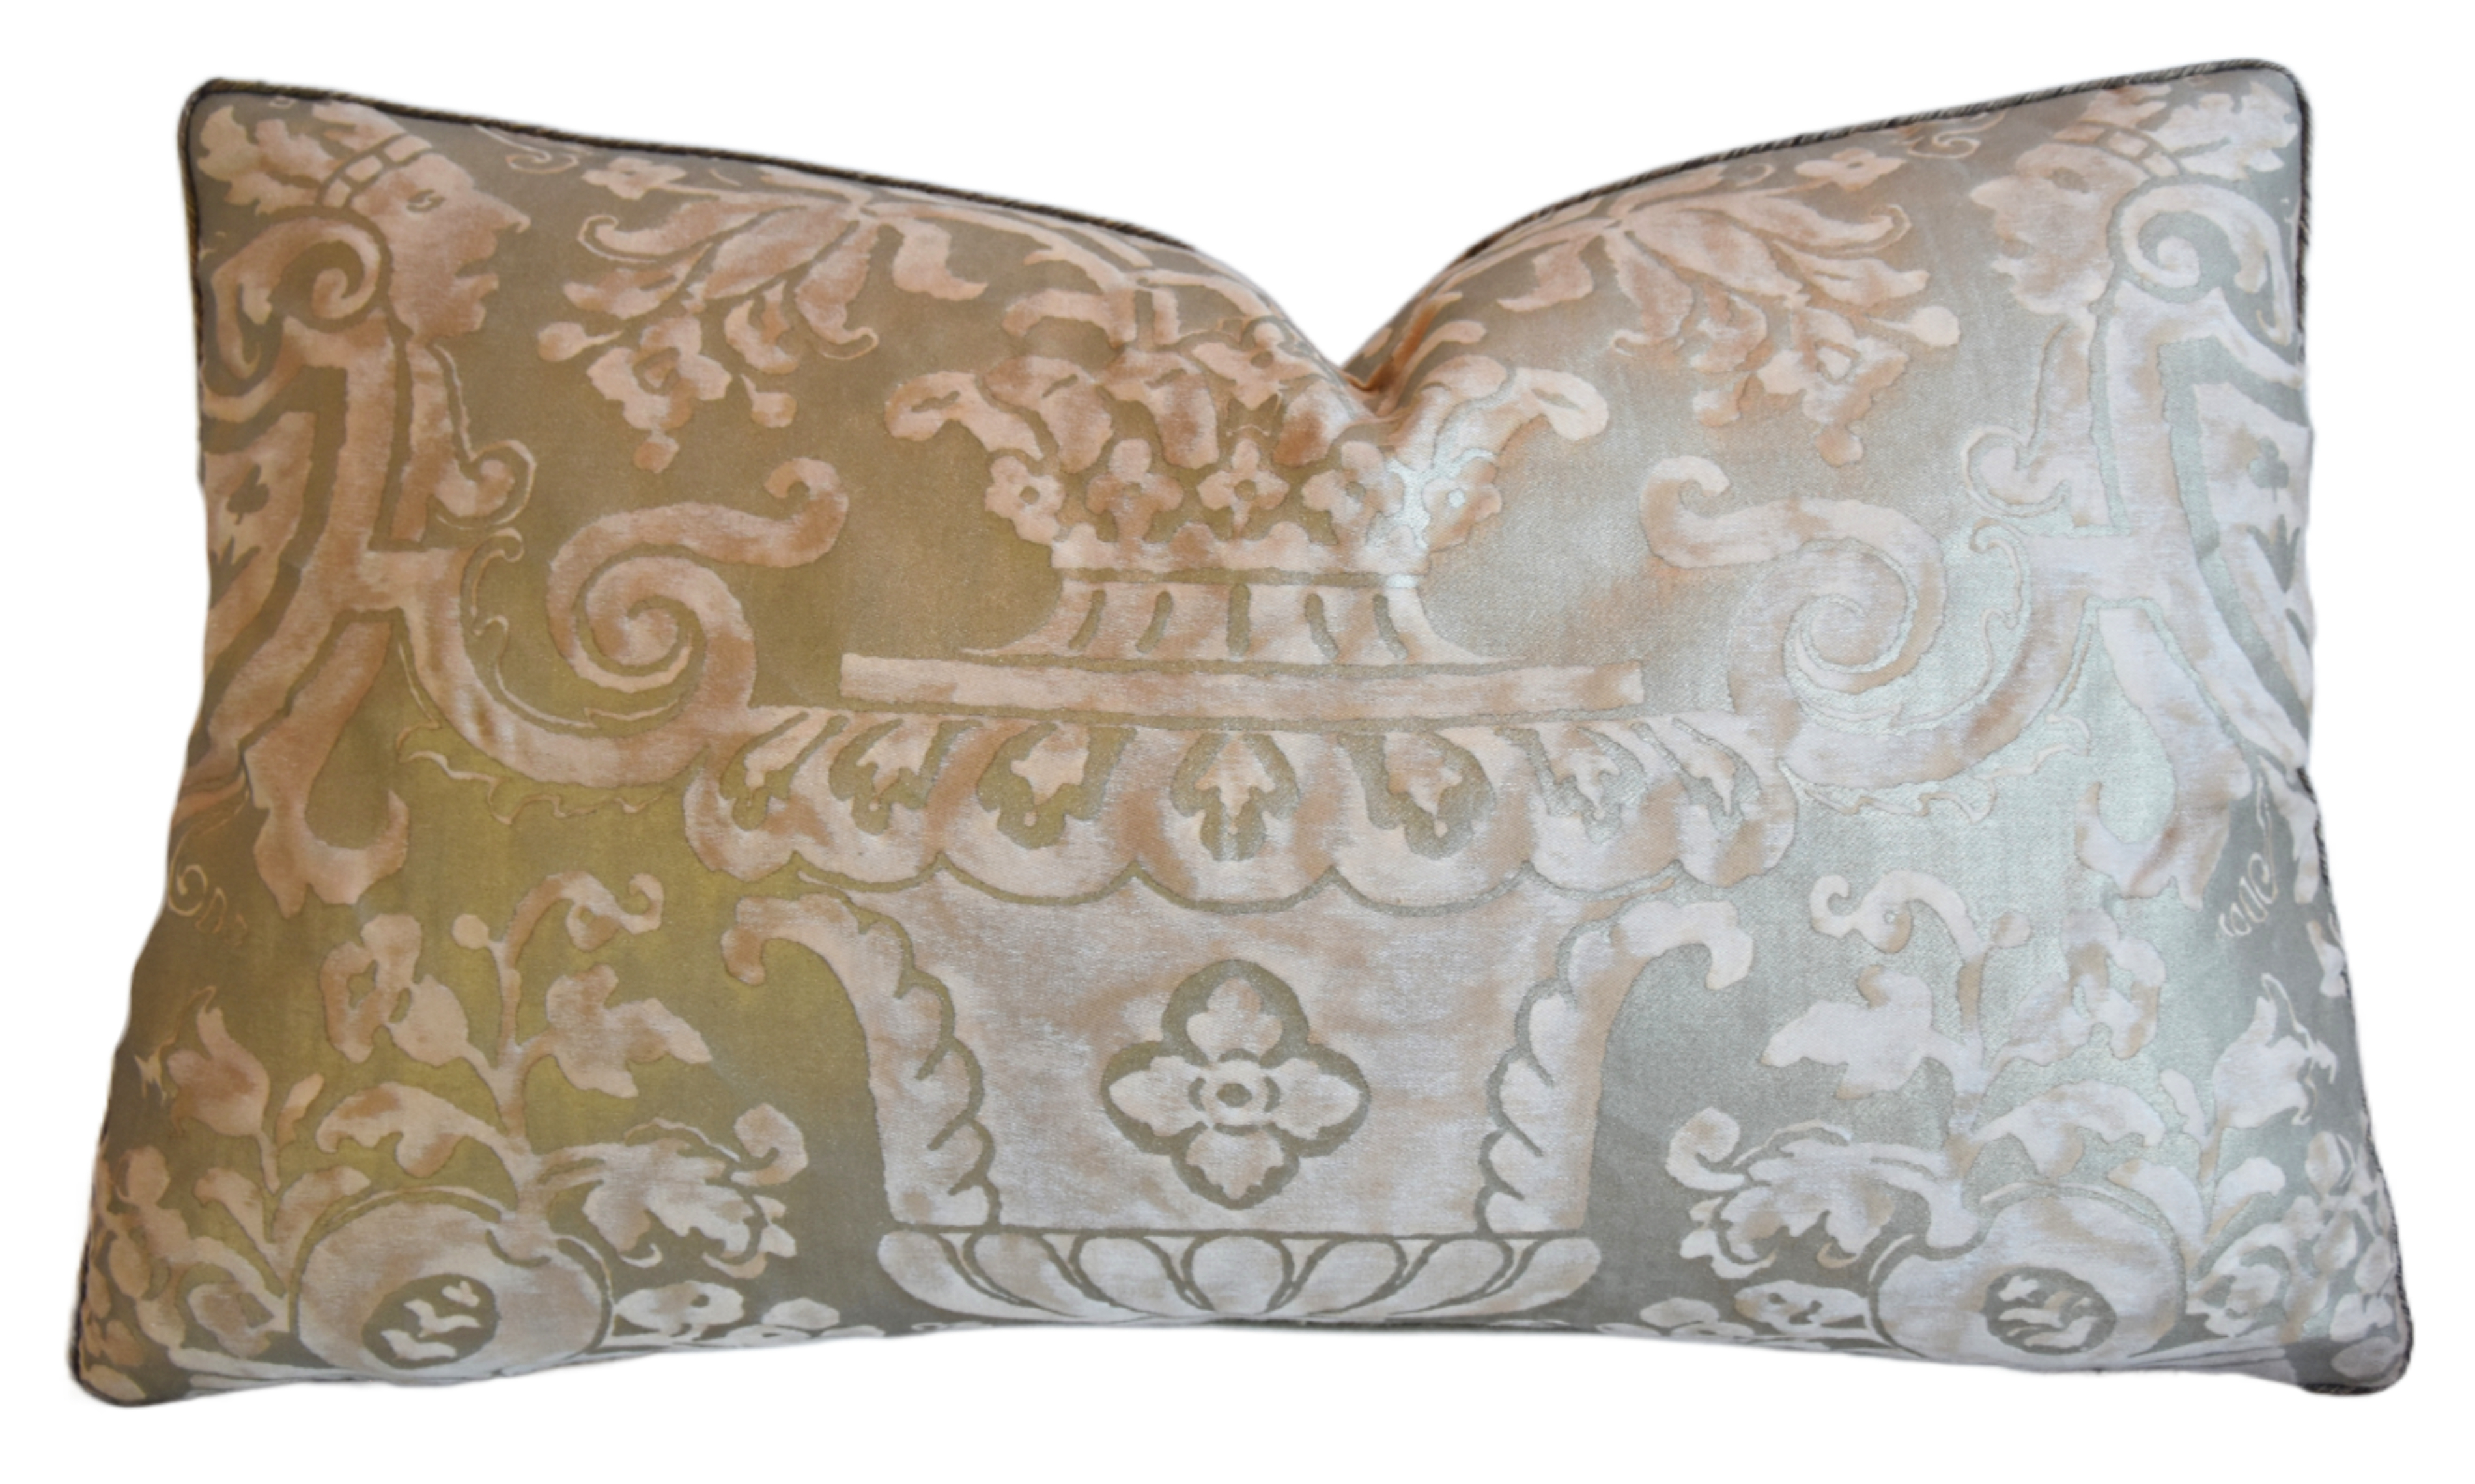 Mariano Fortuny Carnavalet Pillow~P77659790